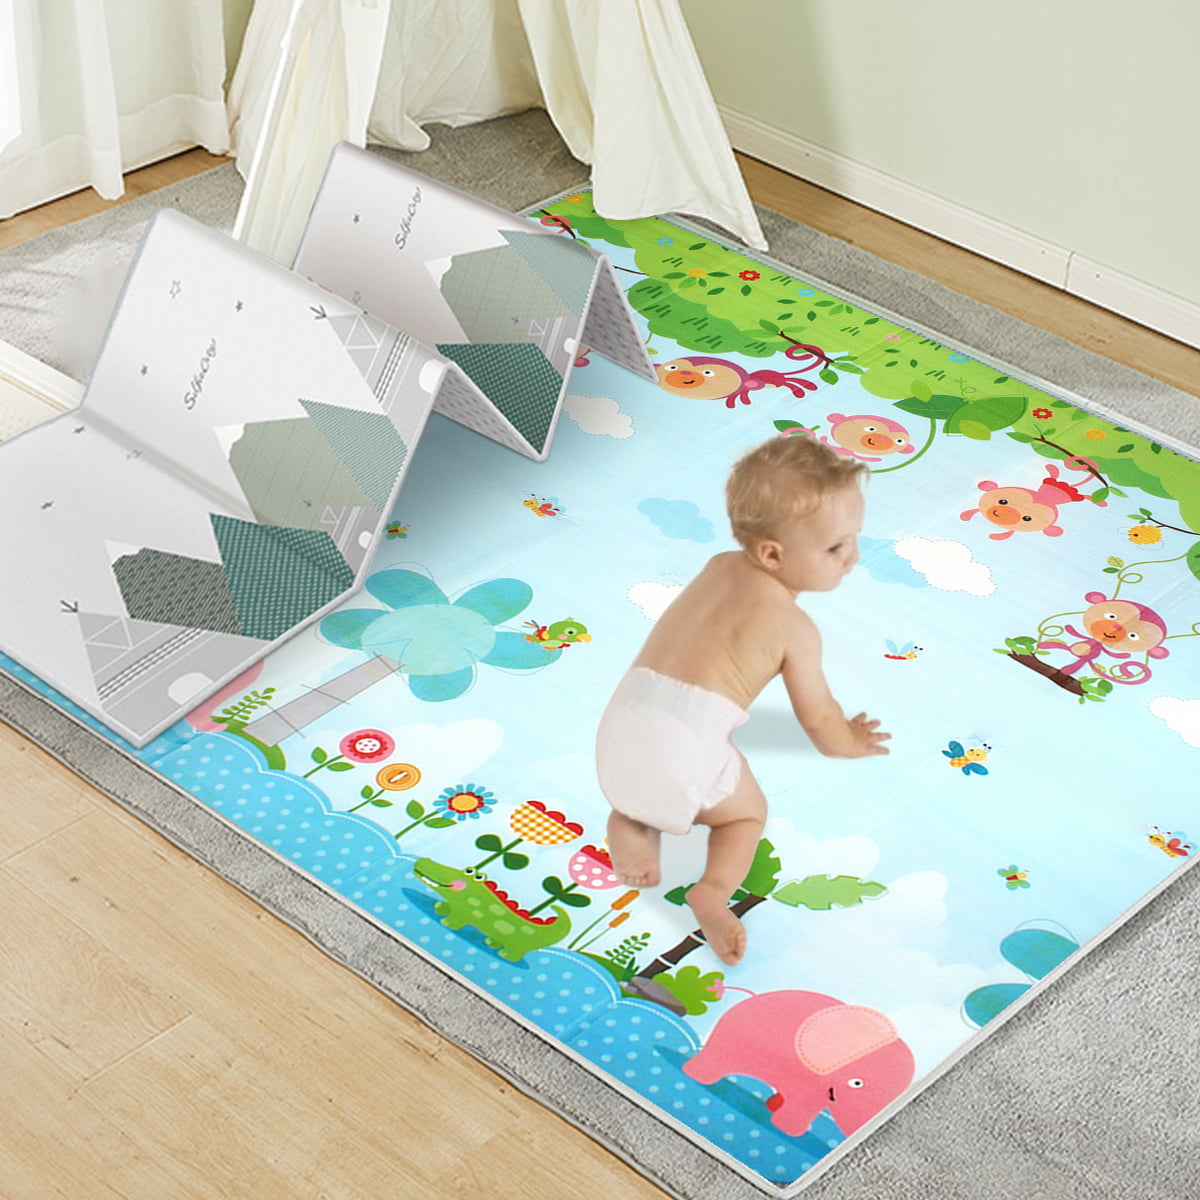 78.4x71x0.4'' Foldable Baby Crawling Mat Kids Play Mat, Safe Double Sides Soft NonSlip